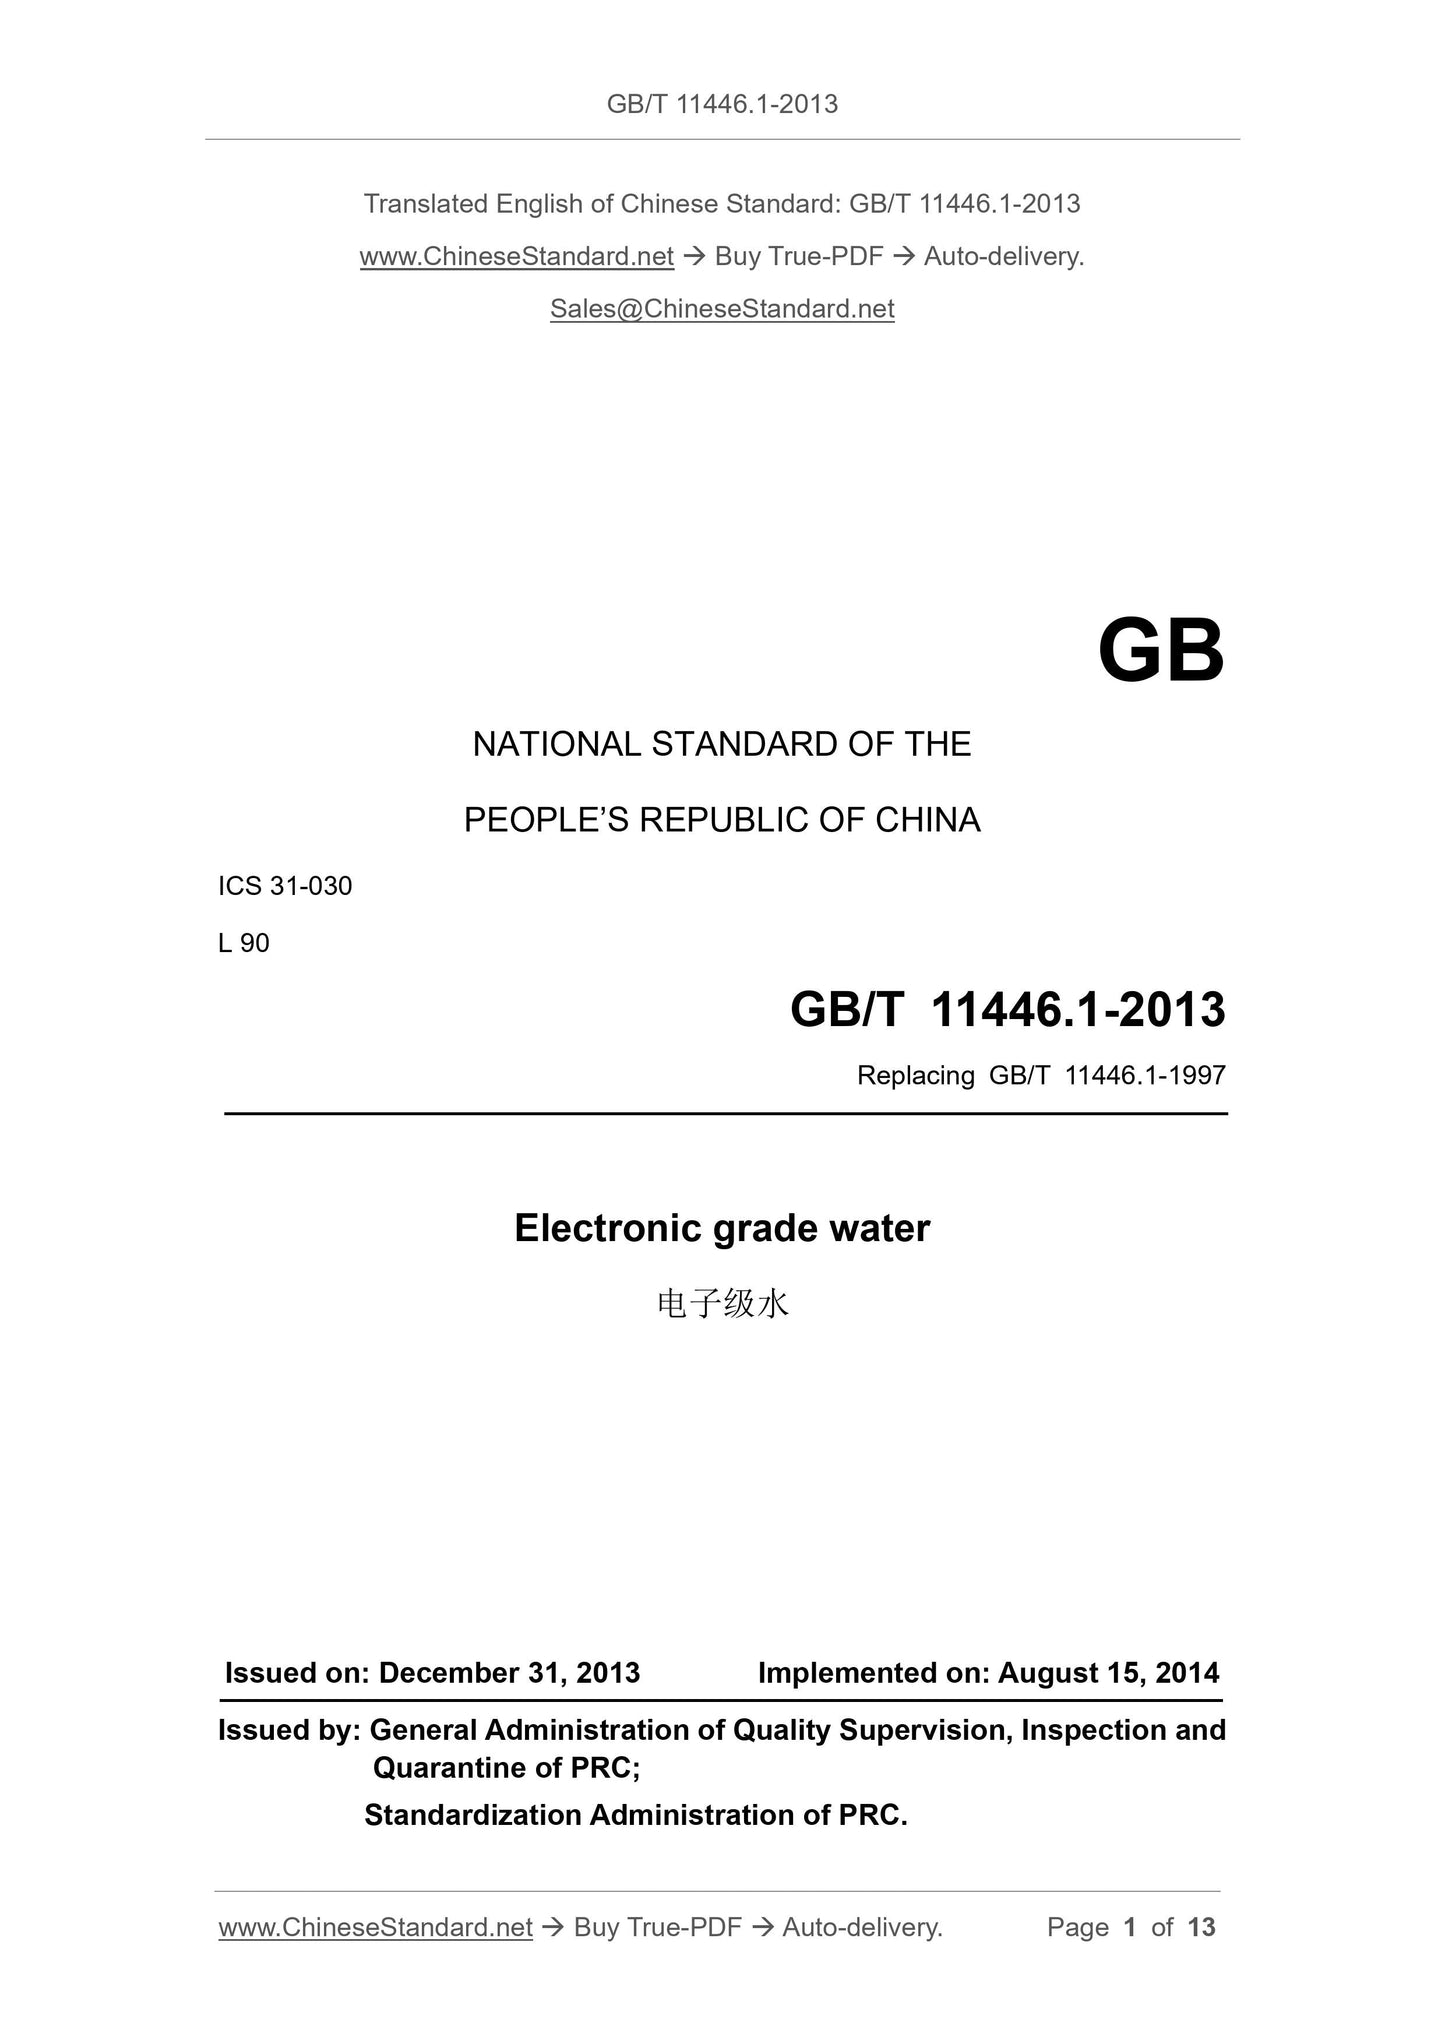 GB/T 11446.1-2013 Page 1